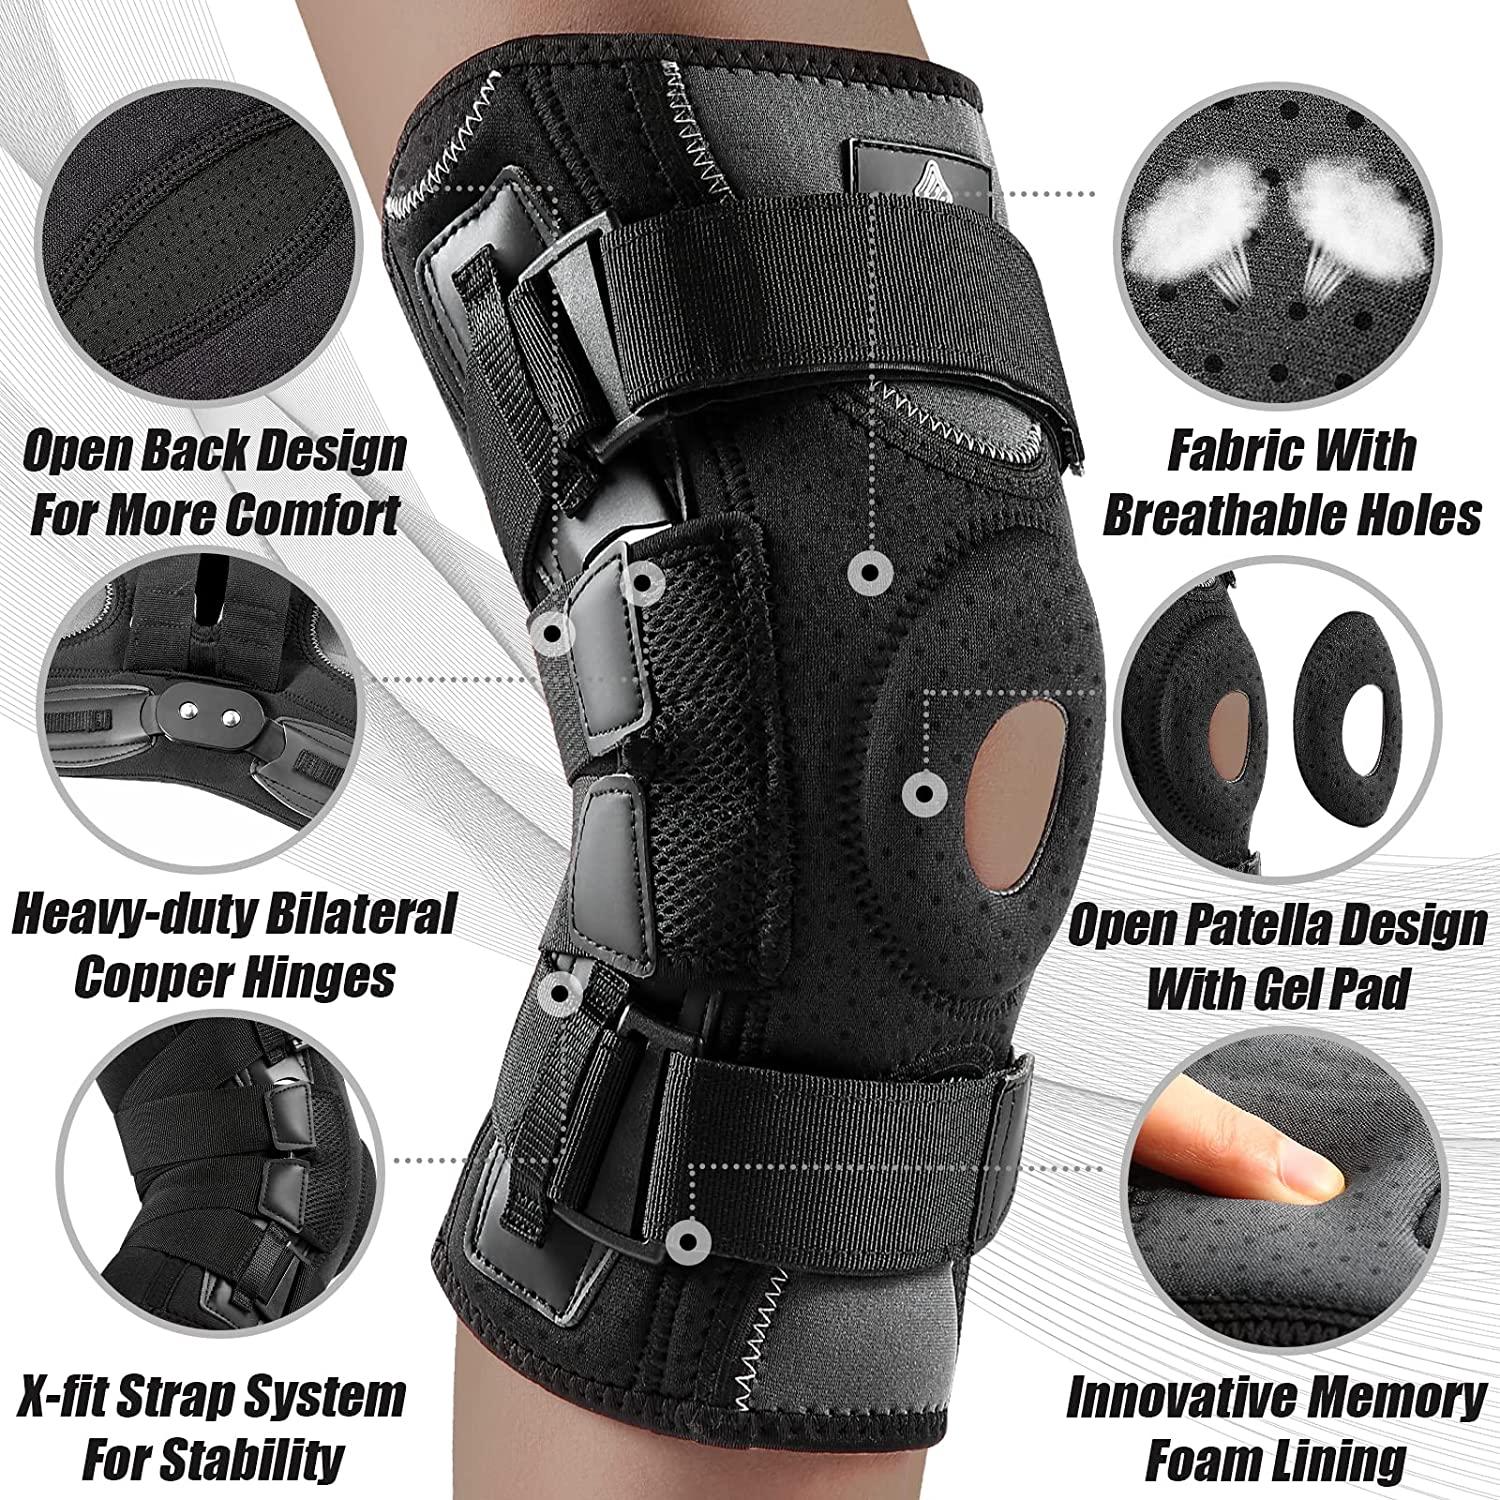 NEENCA Professional Hinged Knee Brace, Medical Knee Support with